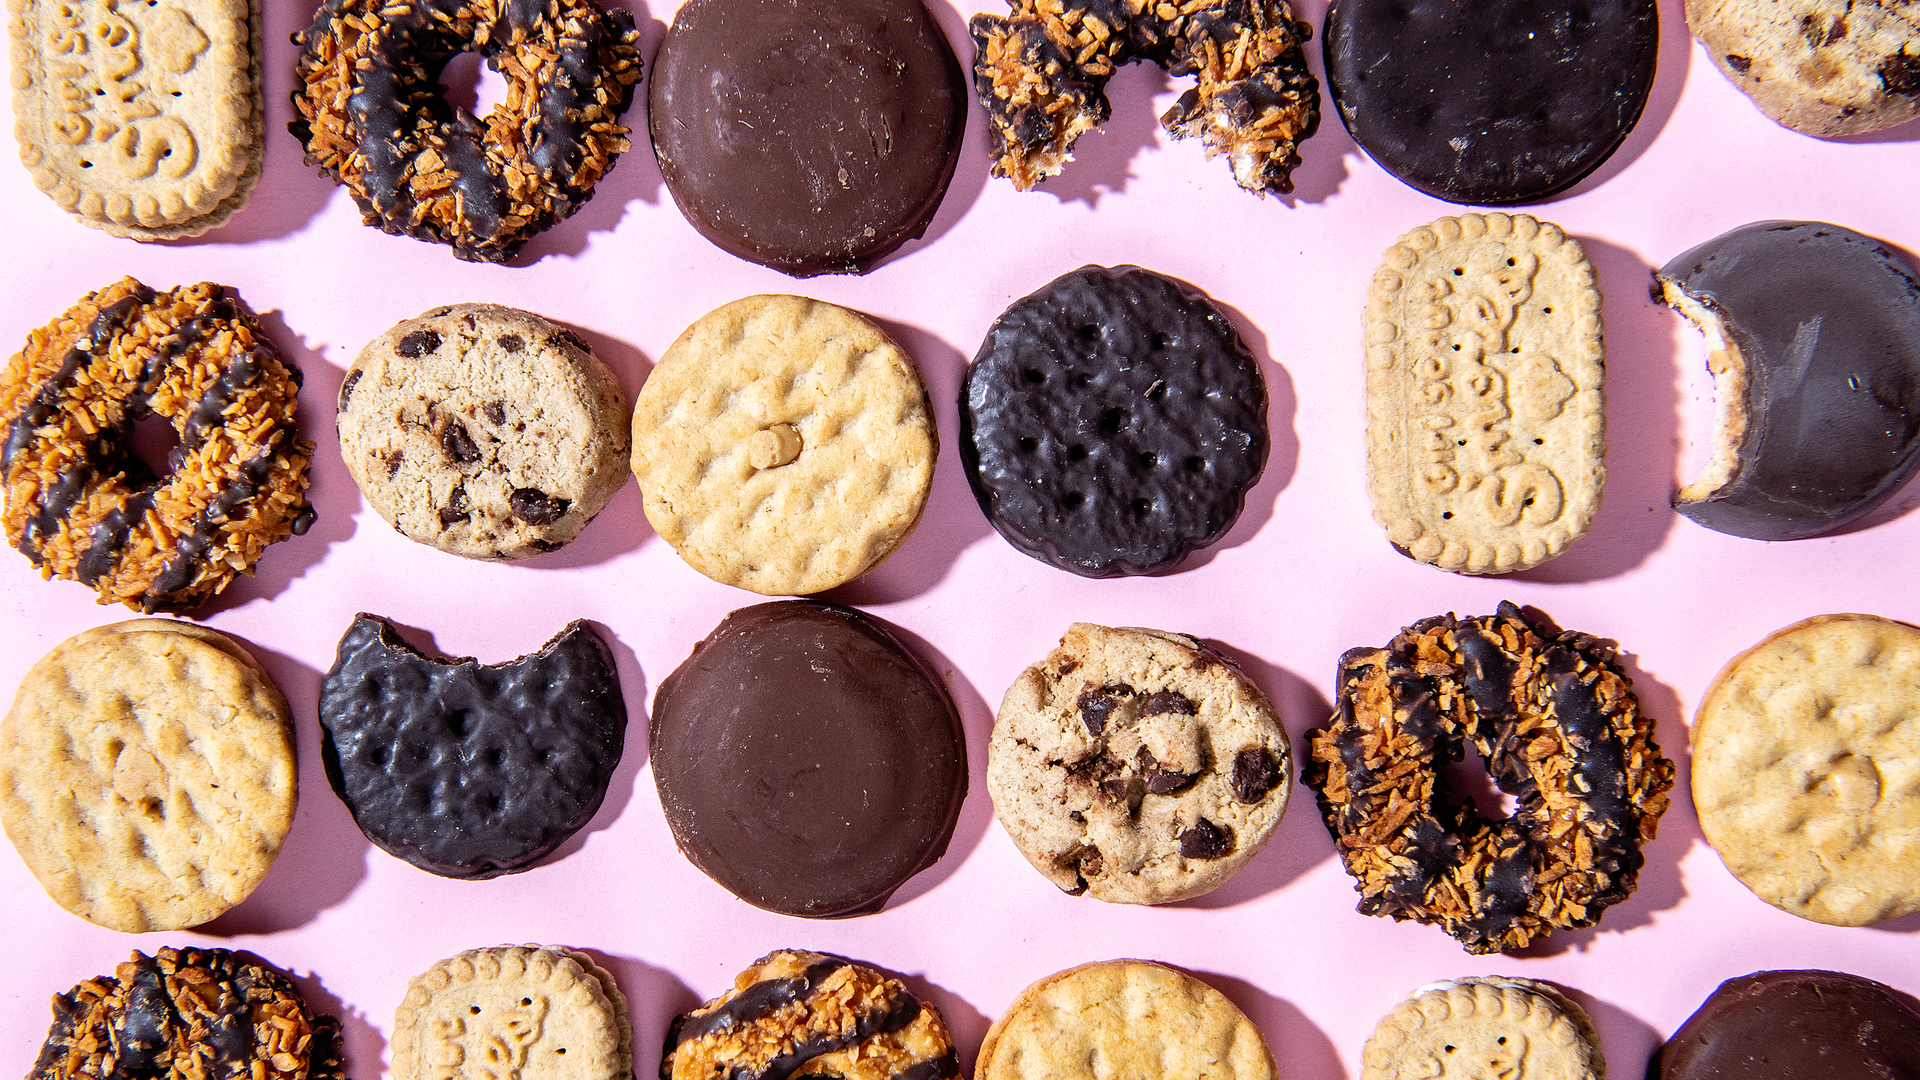 An array of Girl Scouts cookies. Photo: Mariah Tauger/Los Angeles Times via Getty Images